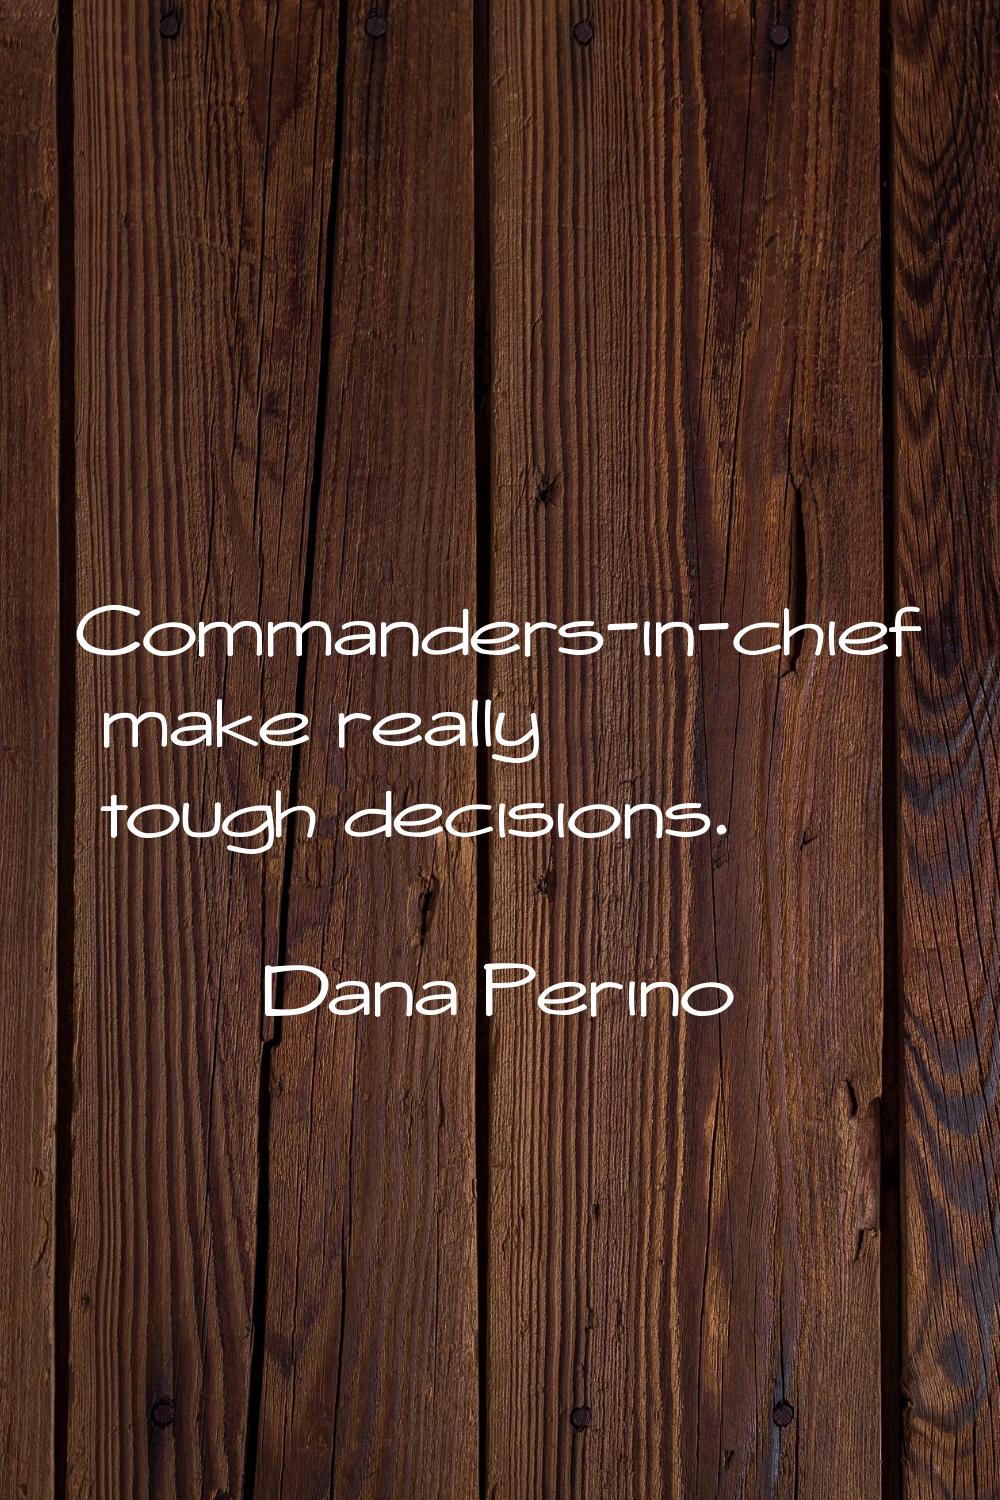 Commanders-in-chief make really tough decisions.